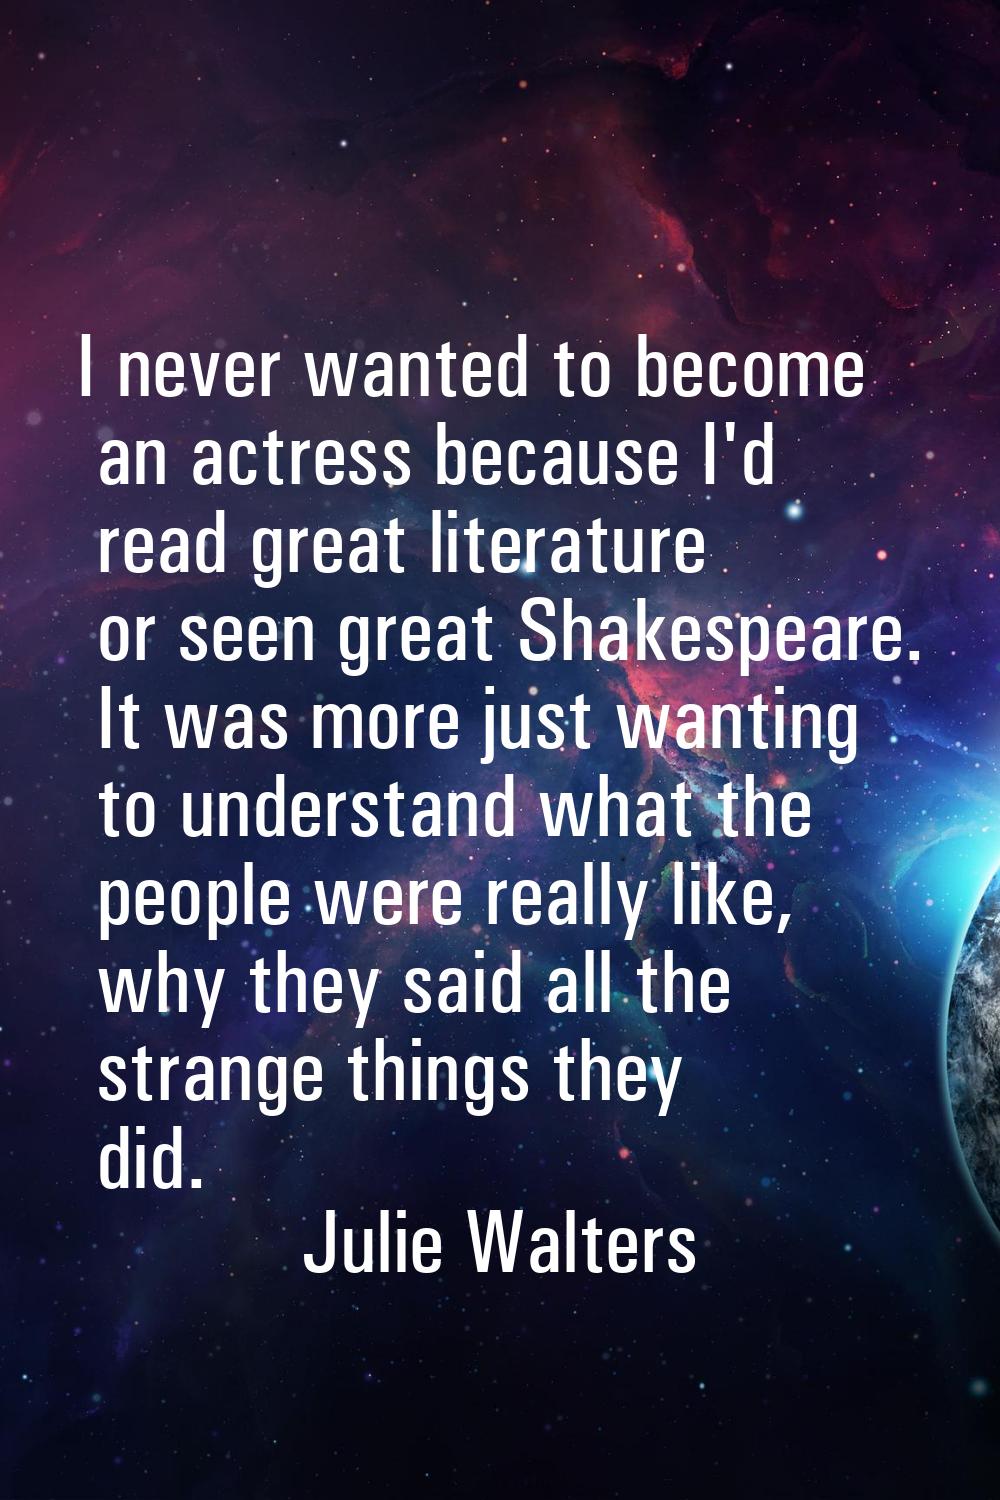 I never wanted to become an actress because I'd read great literature or seen great Shakespeare. It